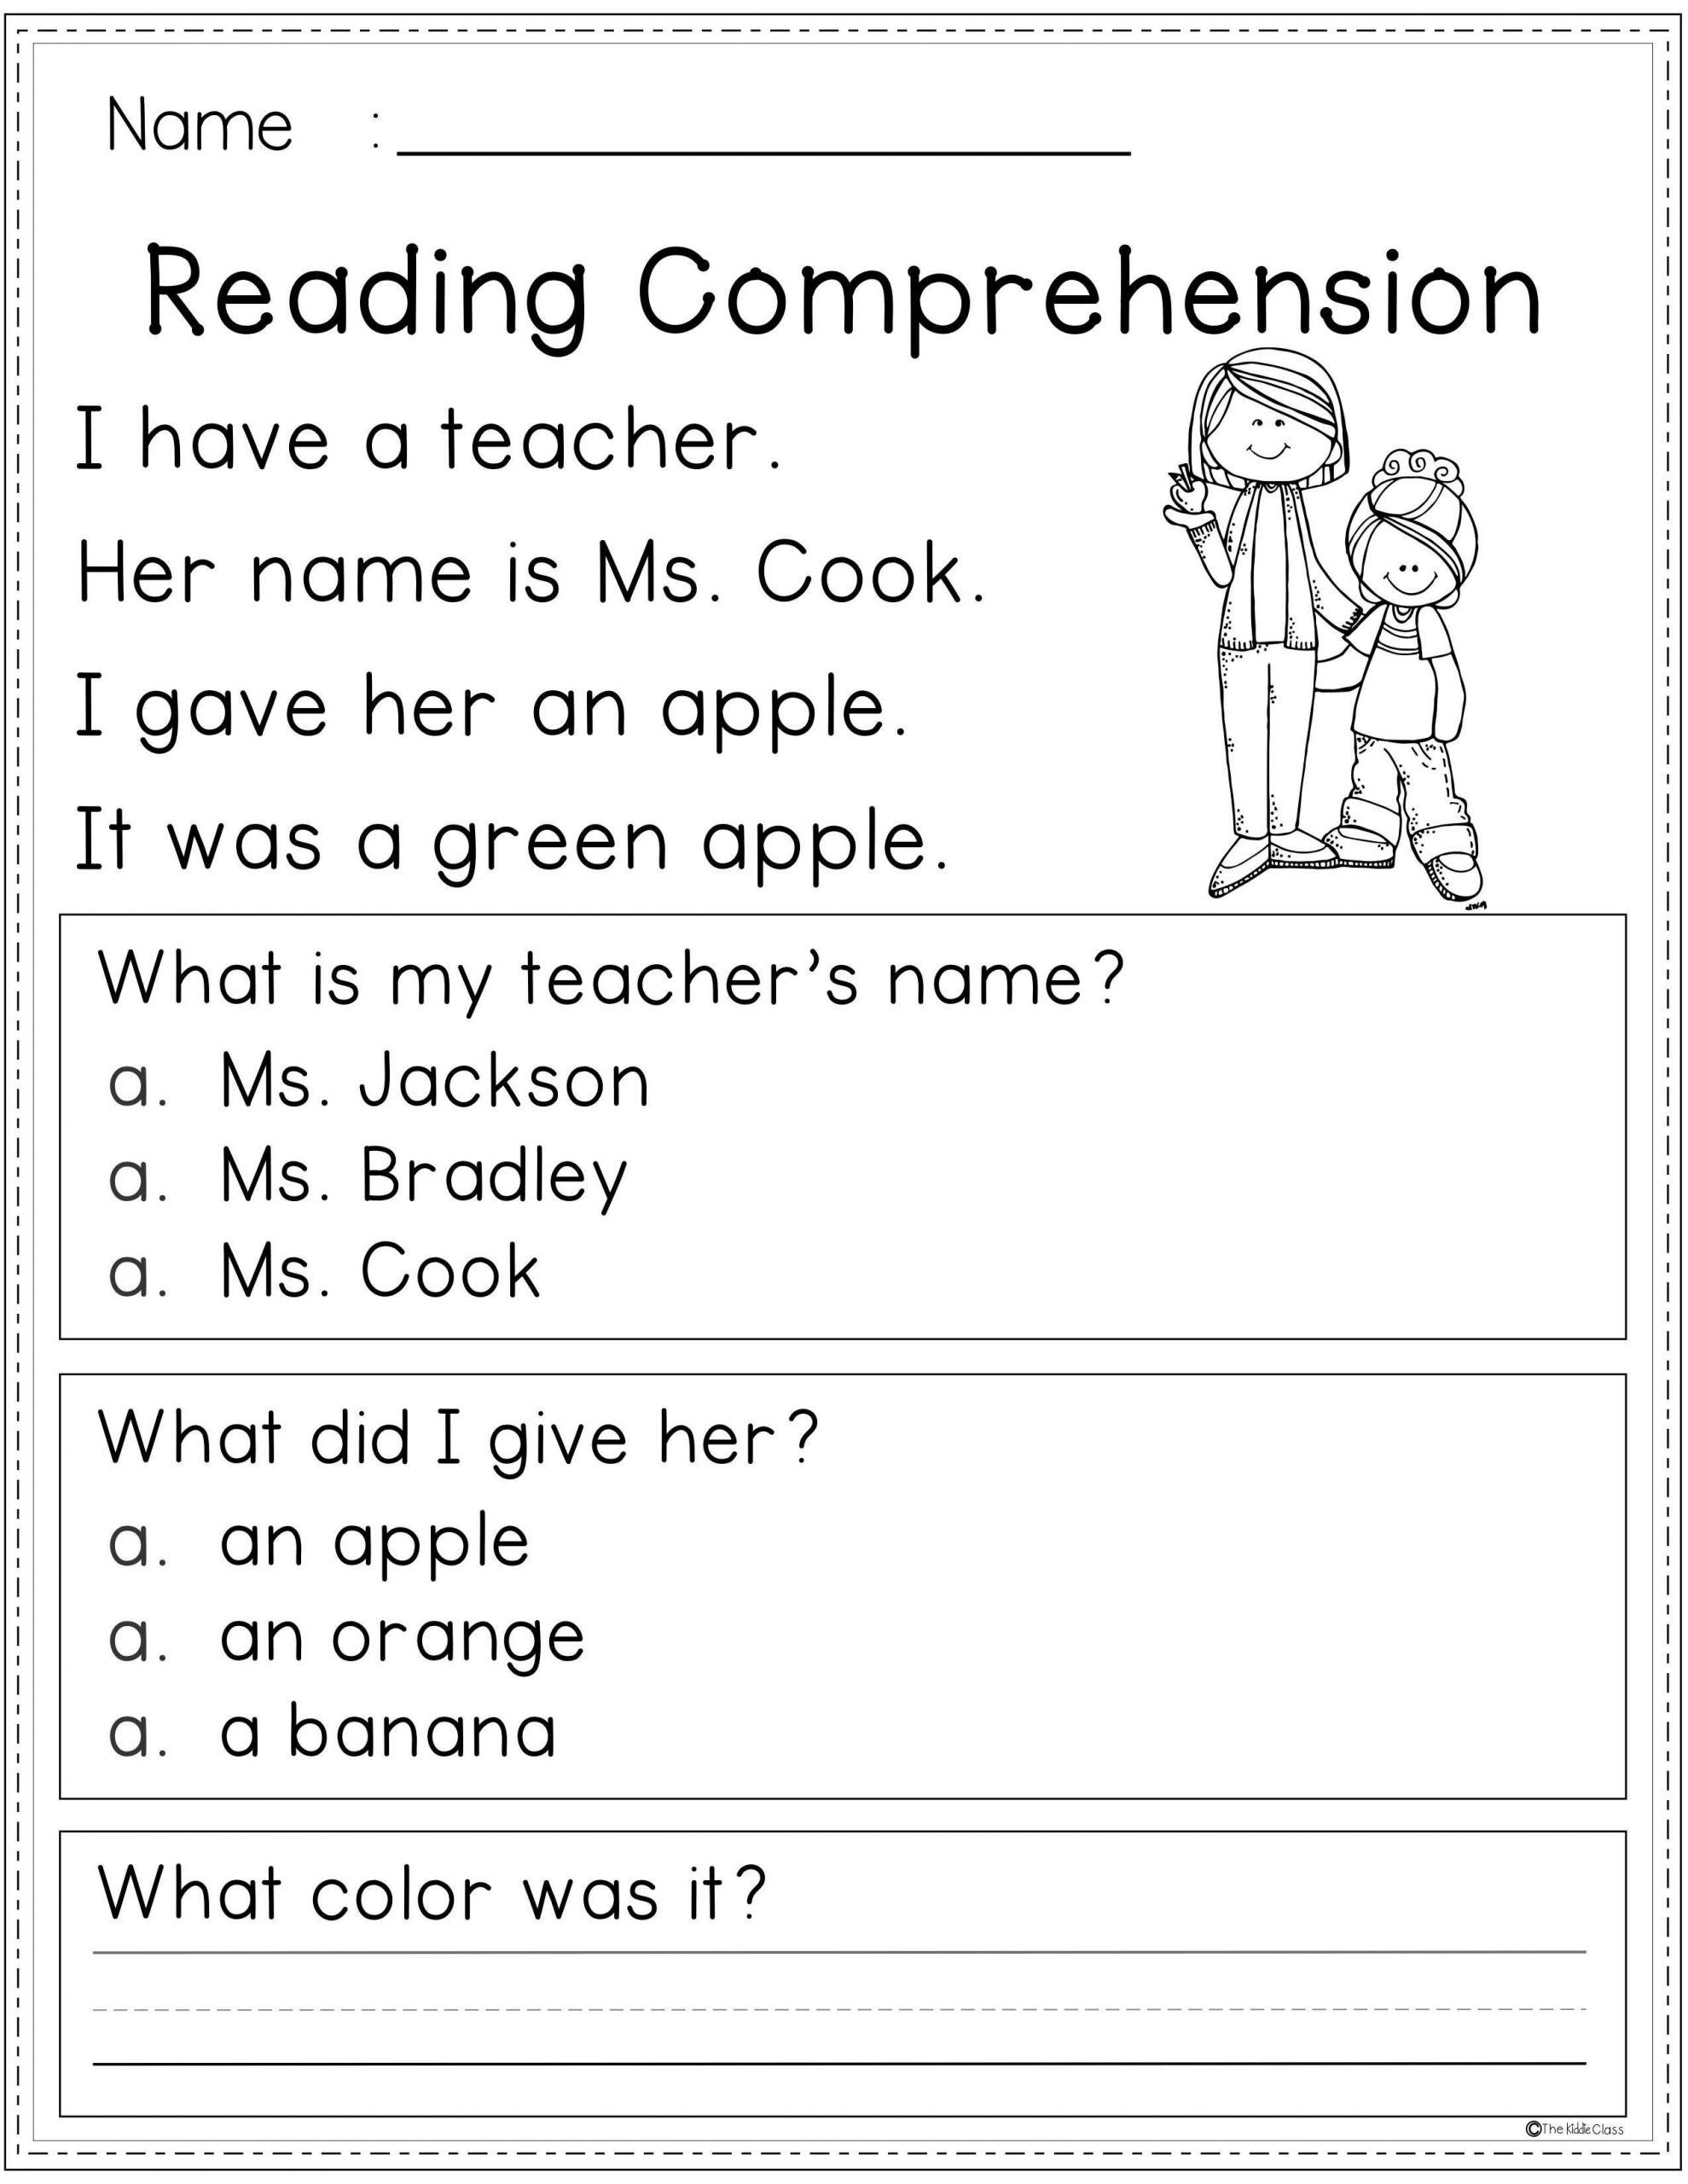 2nd grade reading comprehension worksheets multiple choice with answers